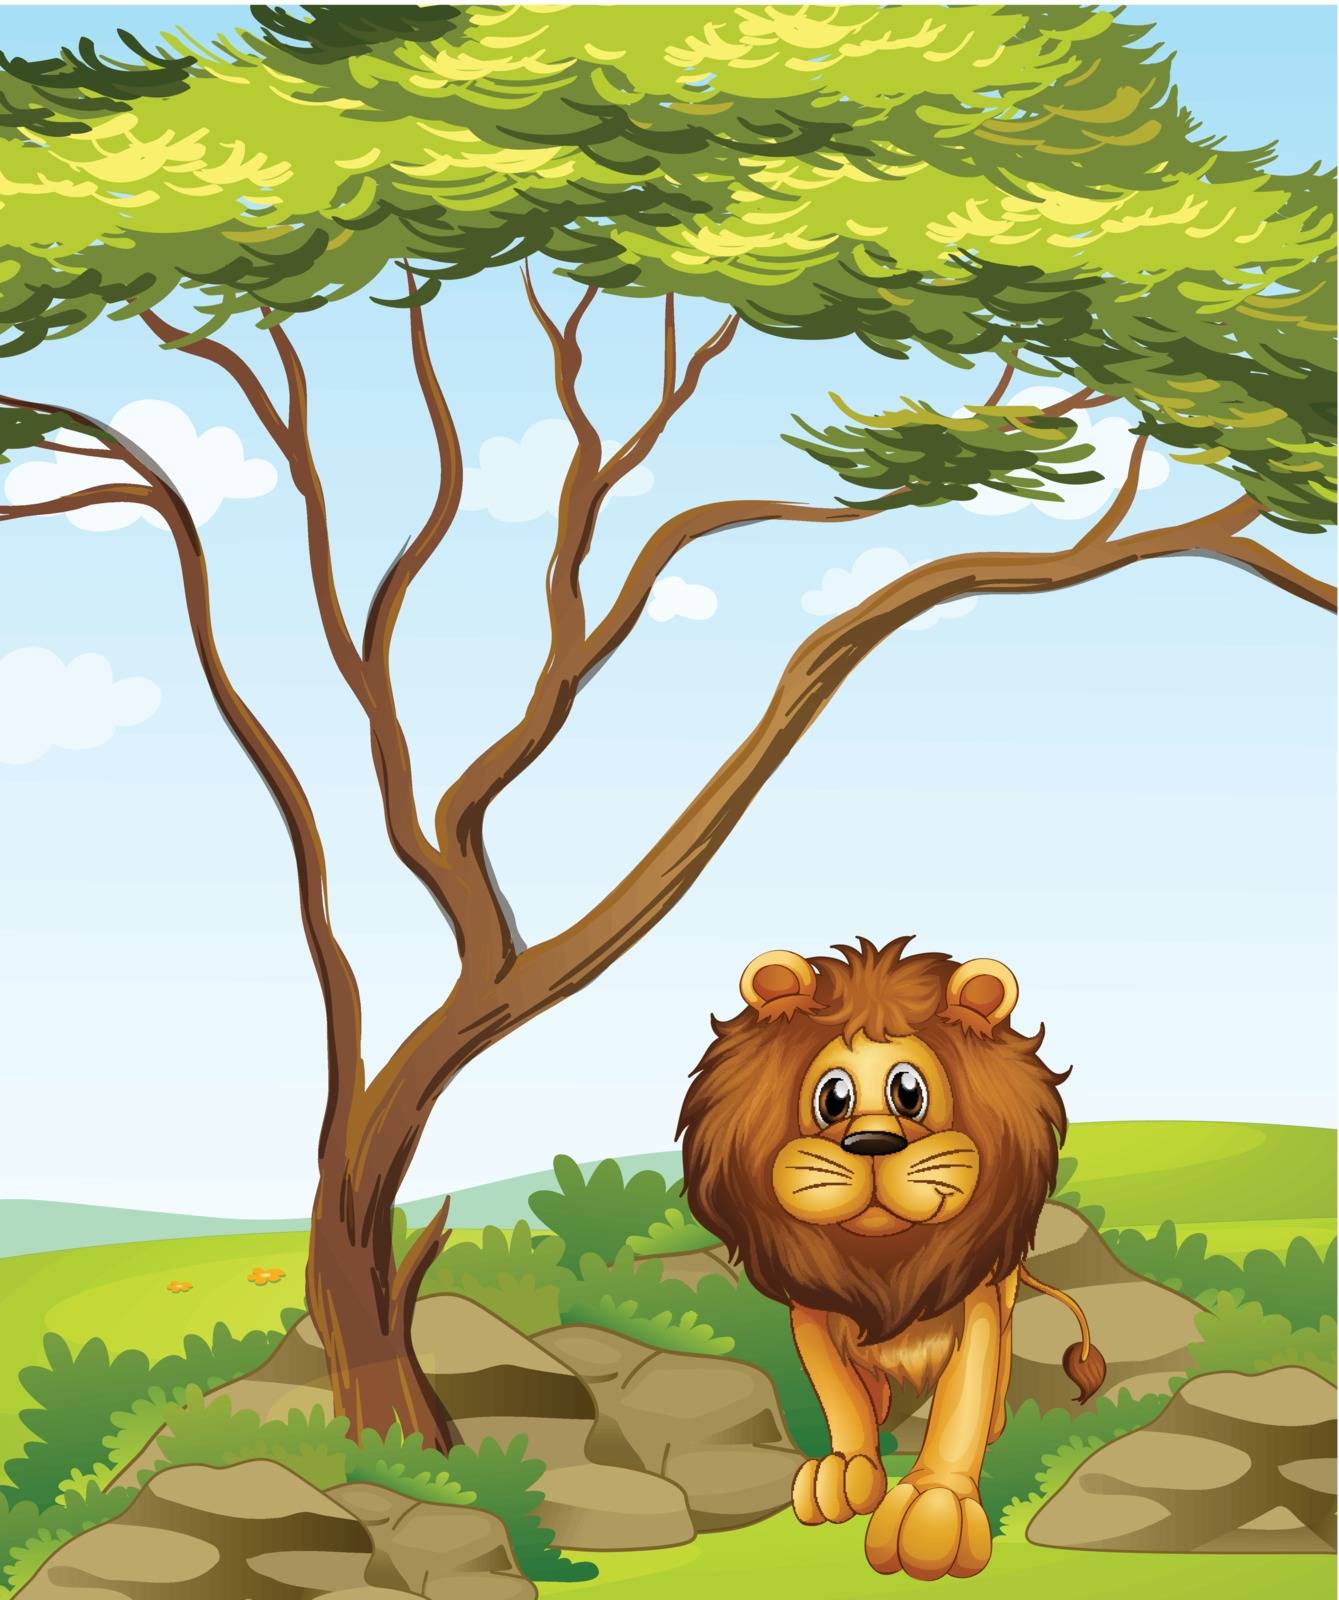 Illustration of a lion under a tall tree